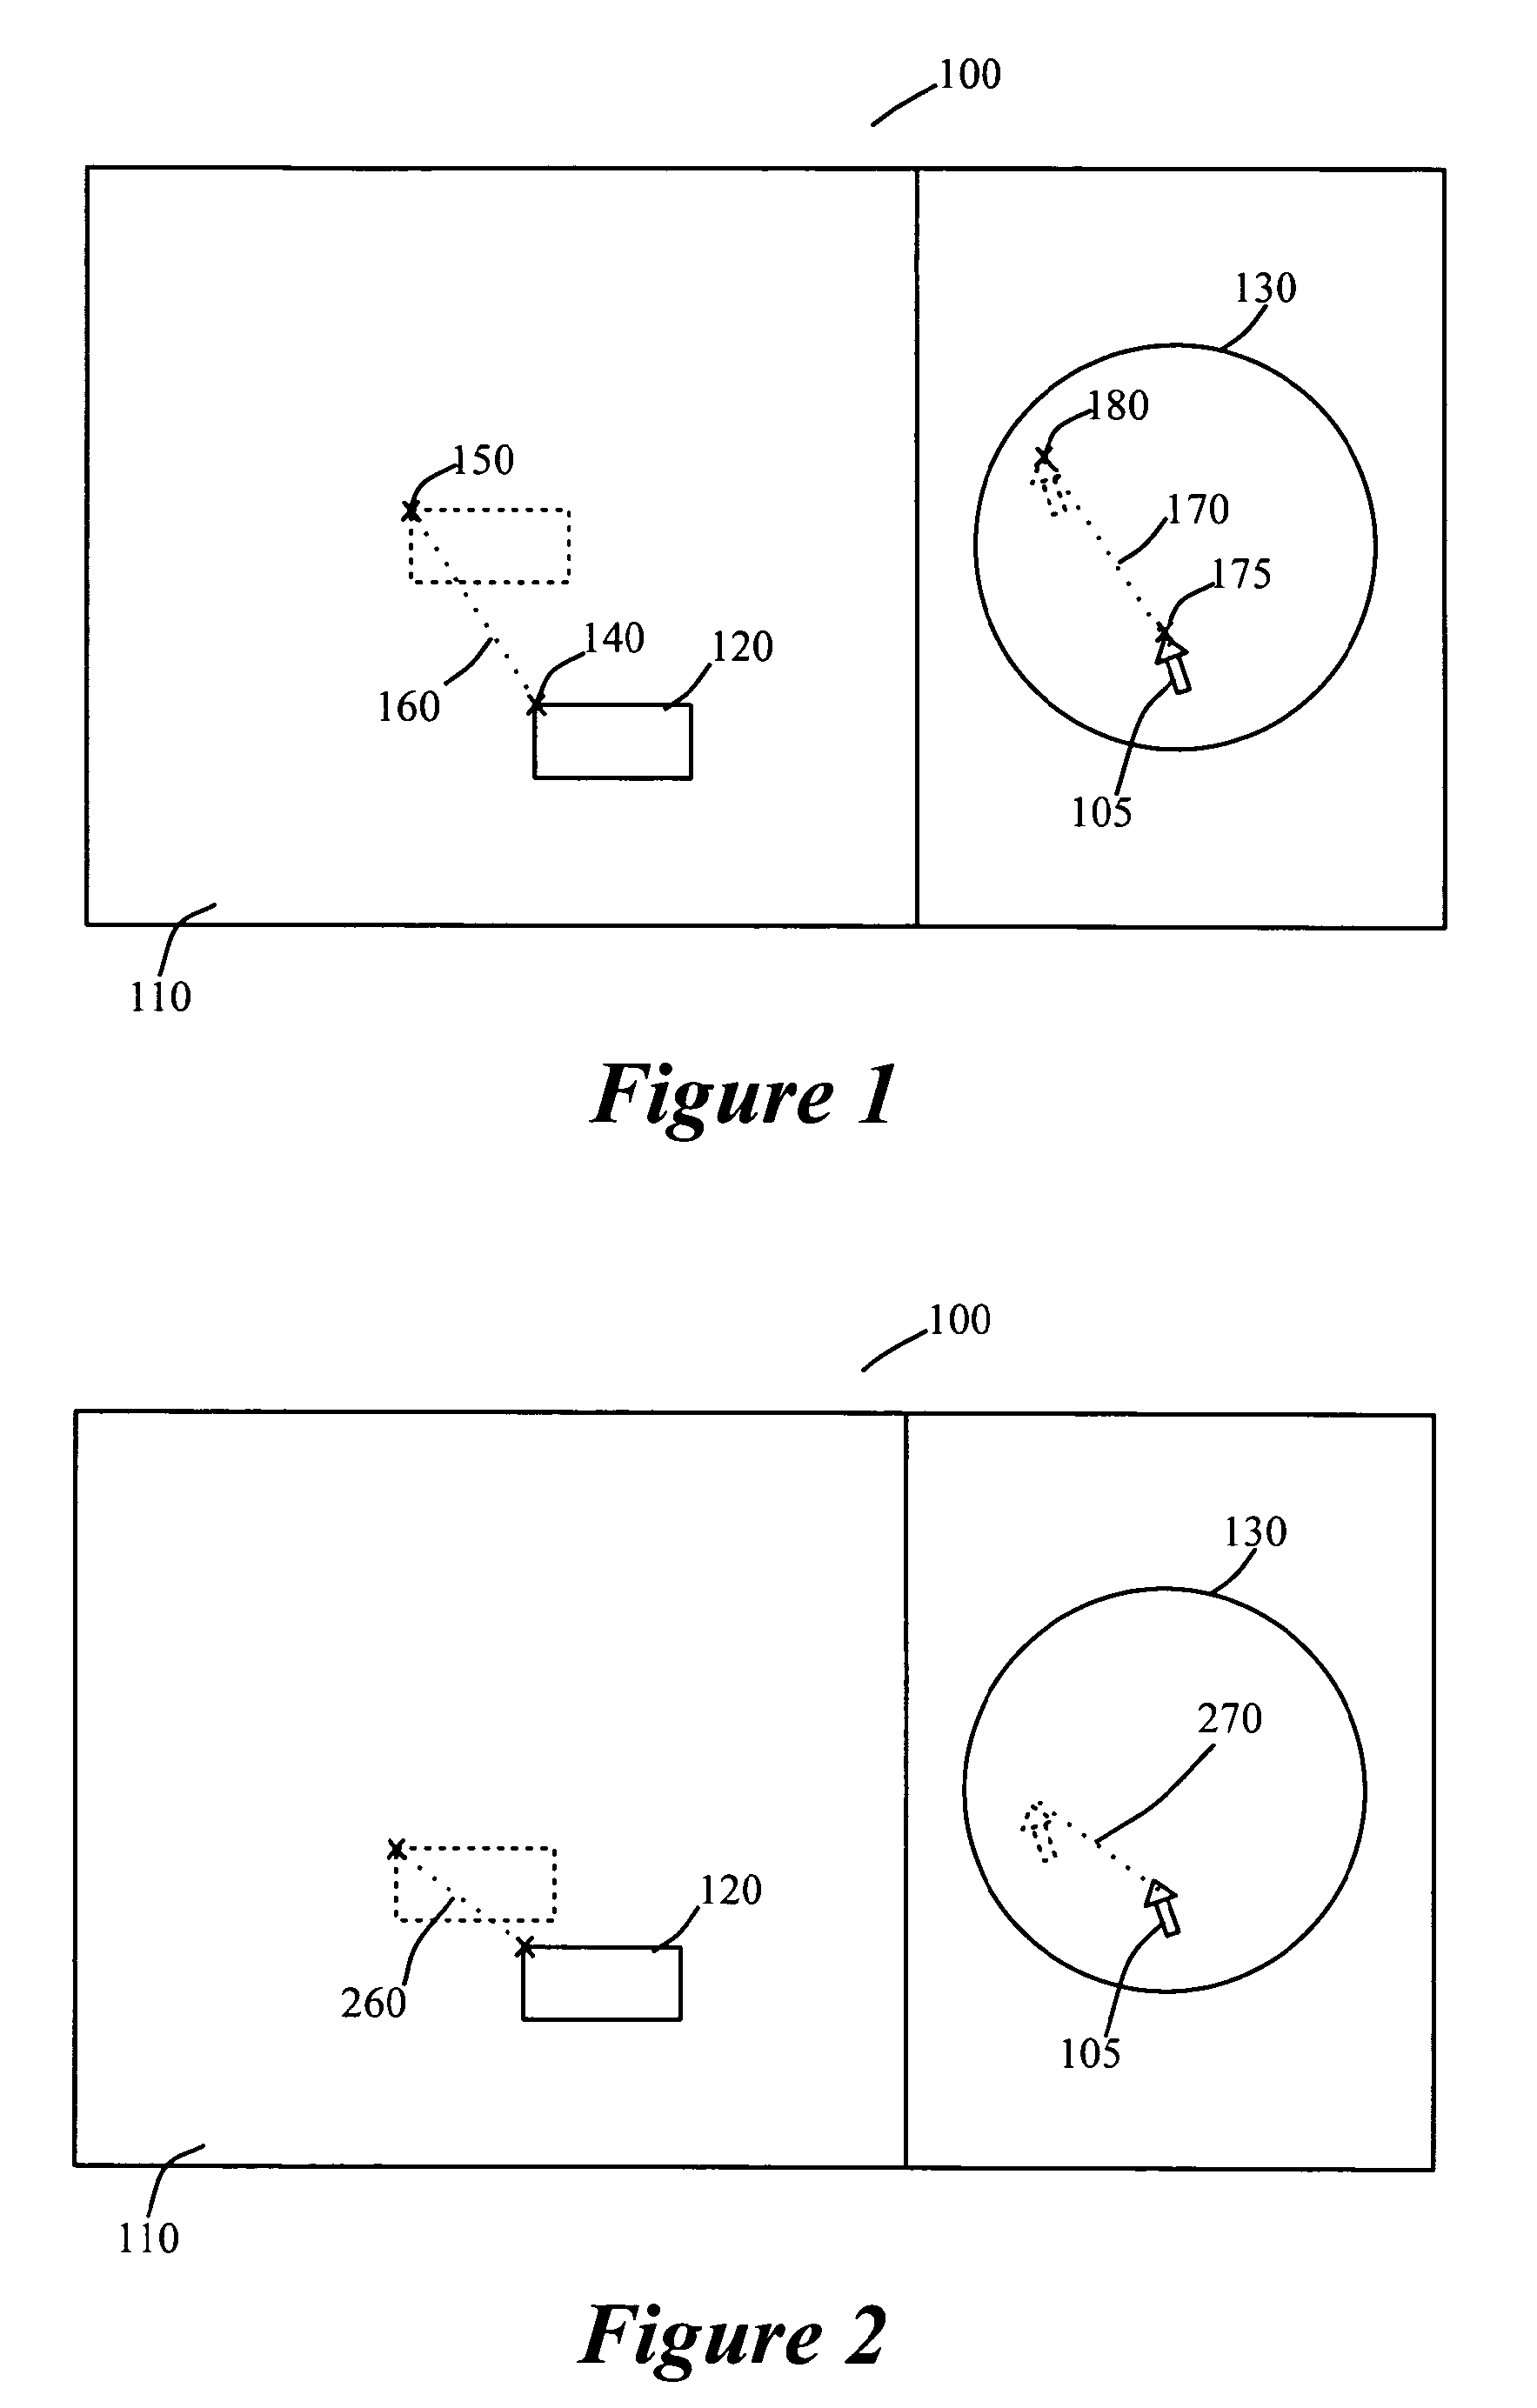 Defining motion in a computer system with a graphical user interface